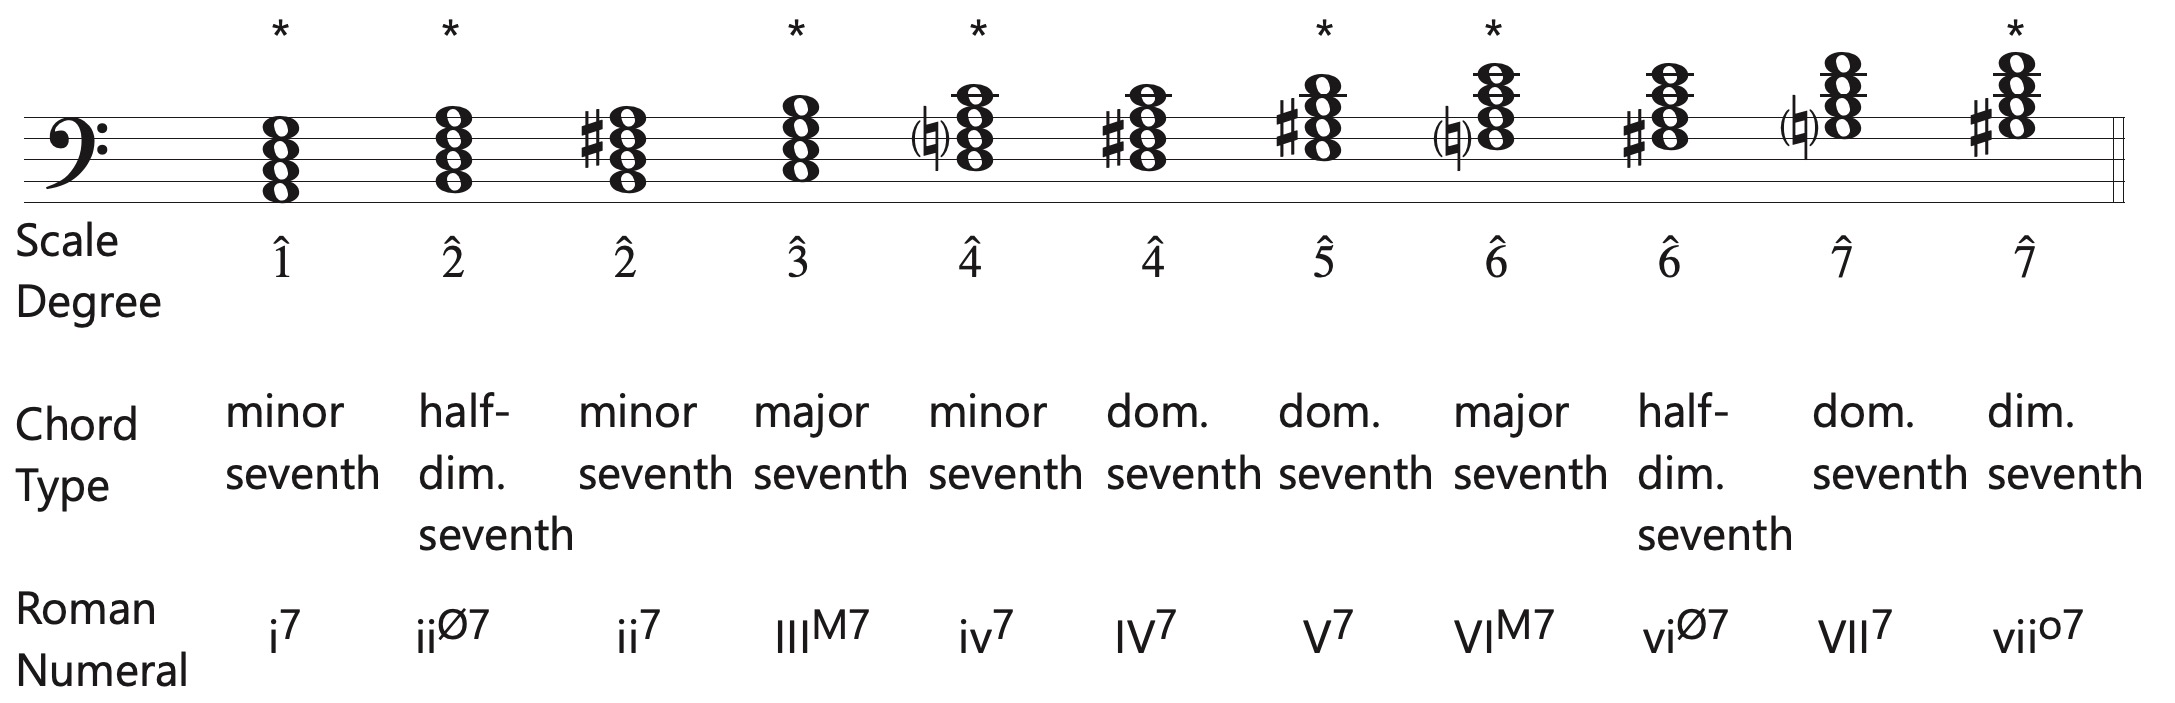 diatonic seventh chords in minor